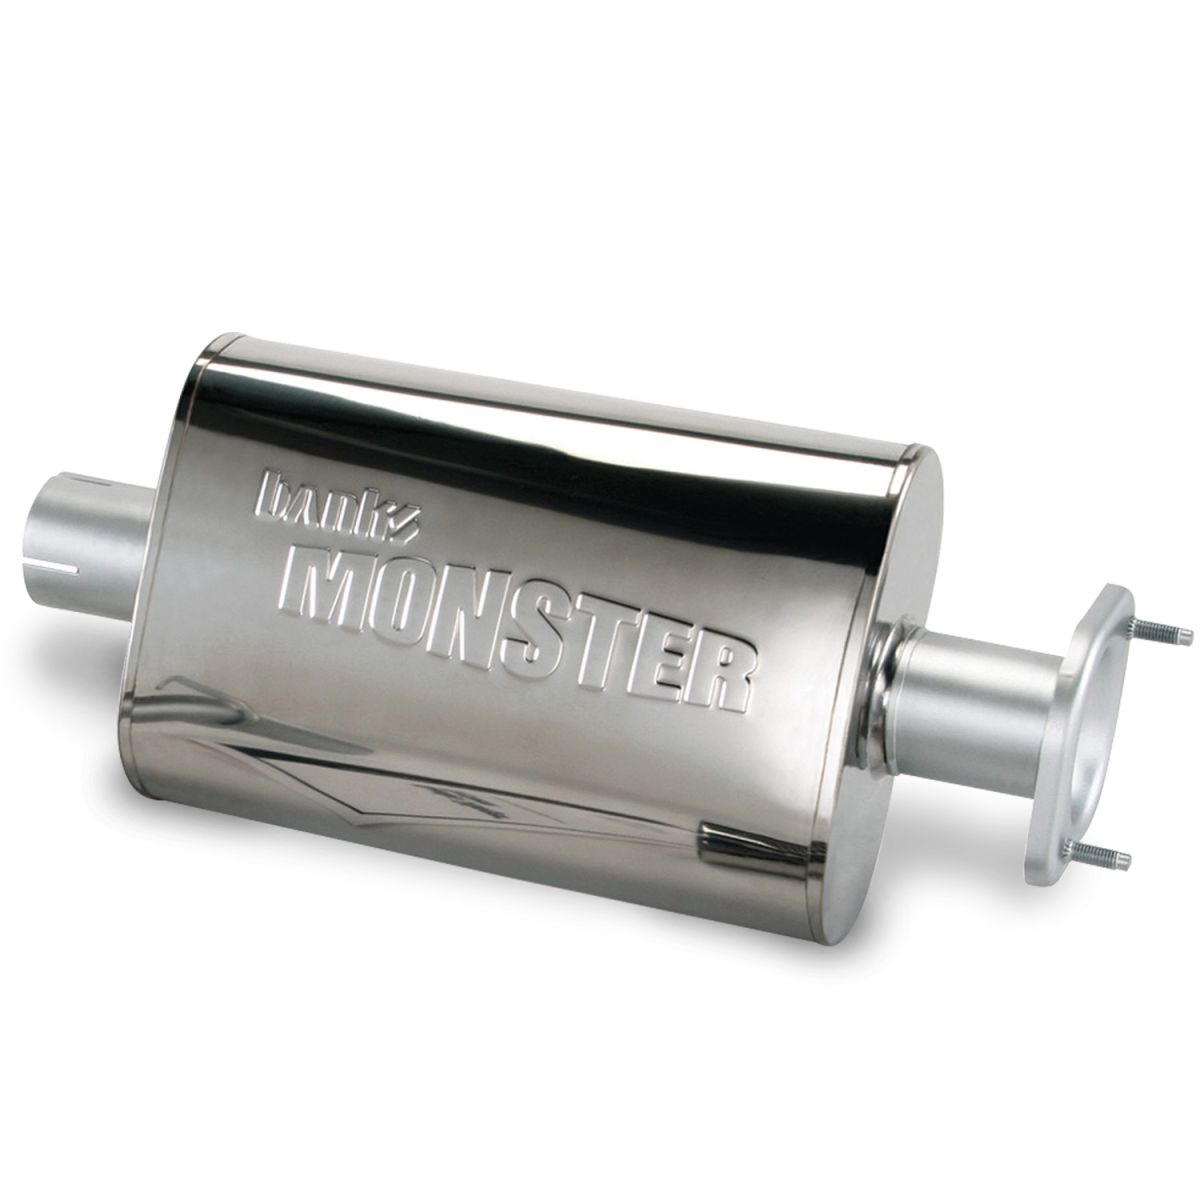 Banks Power - Banks Power Stainless Steel Exhaust Muffler 2.5 Inch Inlet and Outlet W/adapter 00-03 Jeep 4.0L